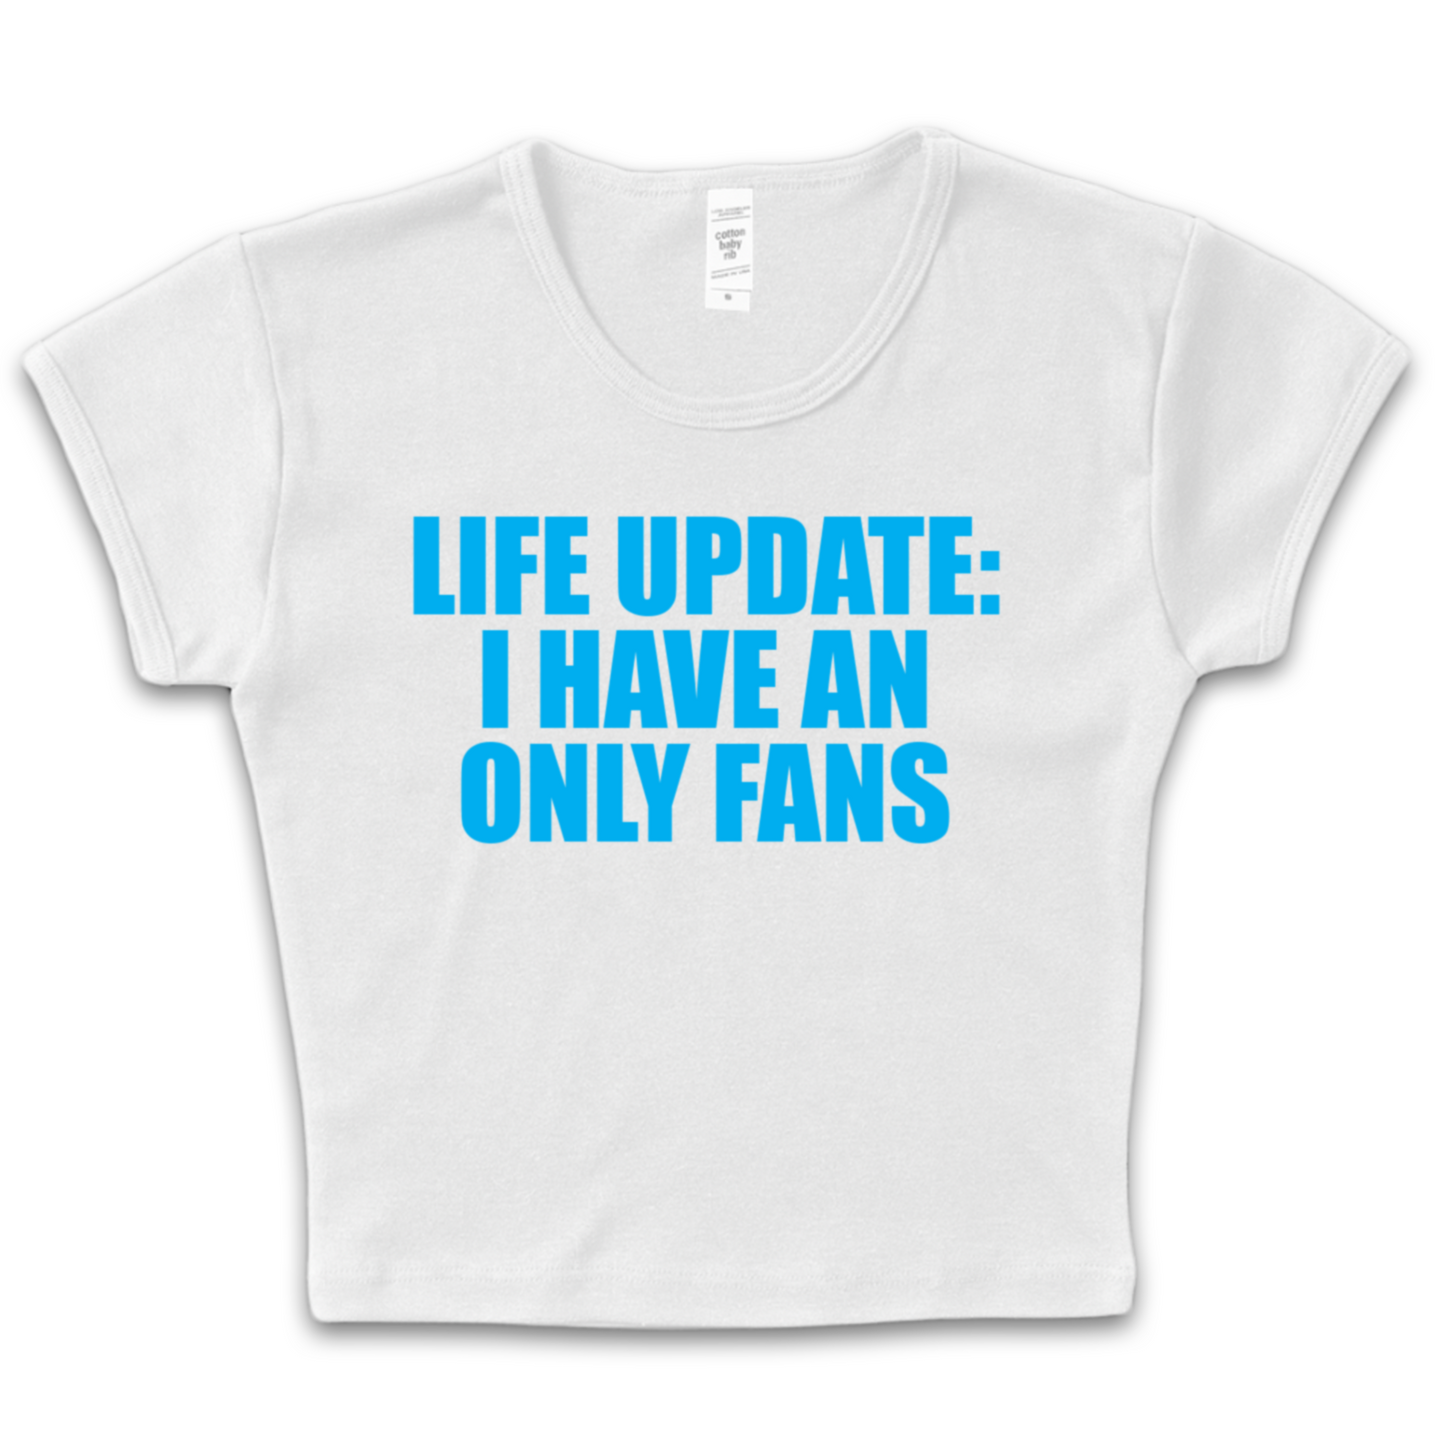 Life Update: I Have An Onlyfans Baby Tee